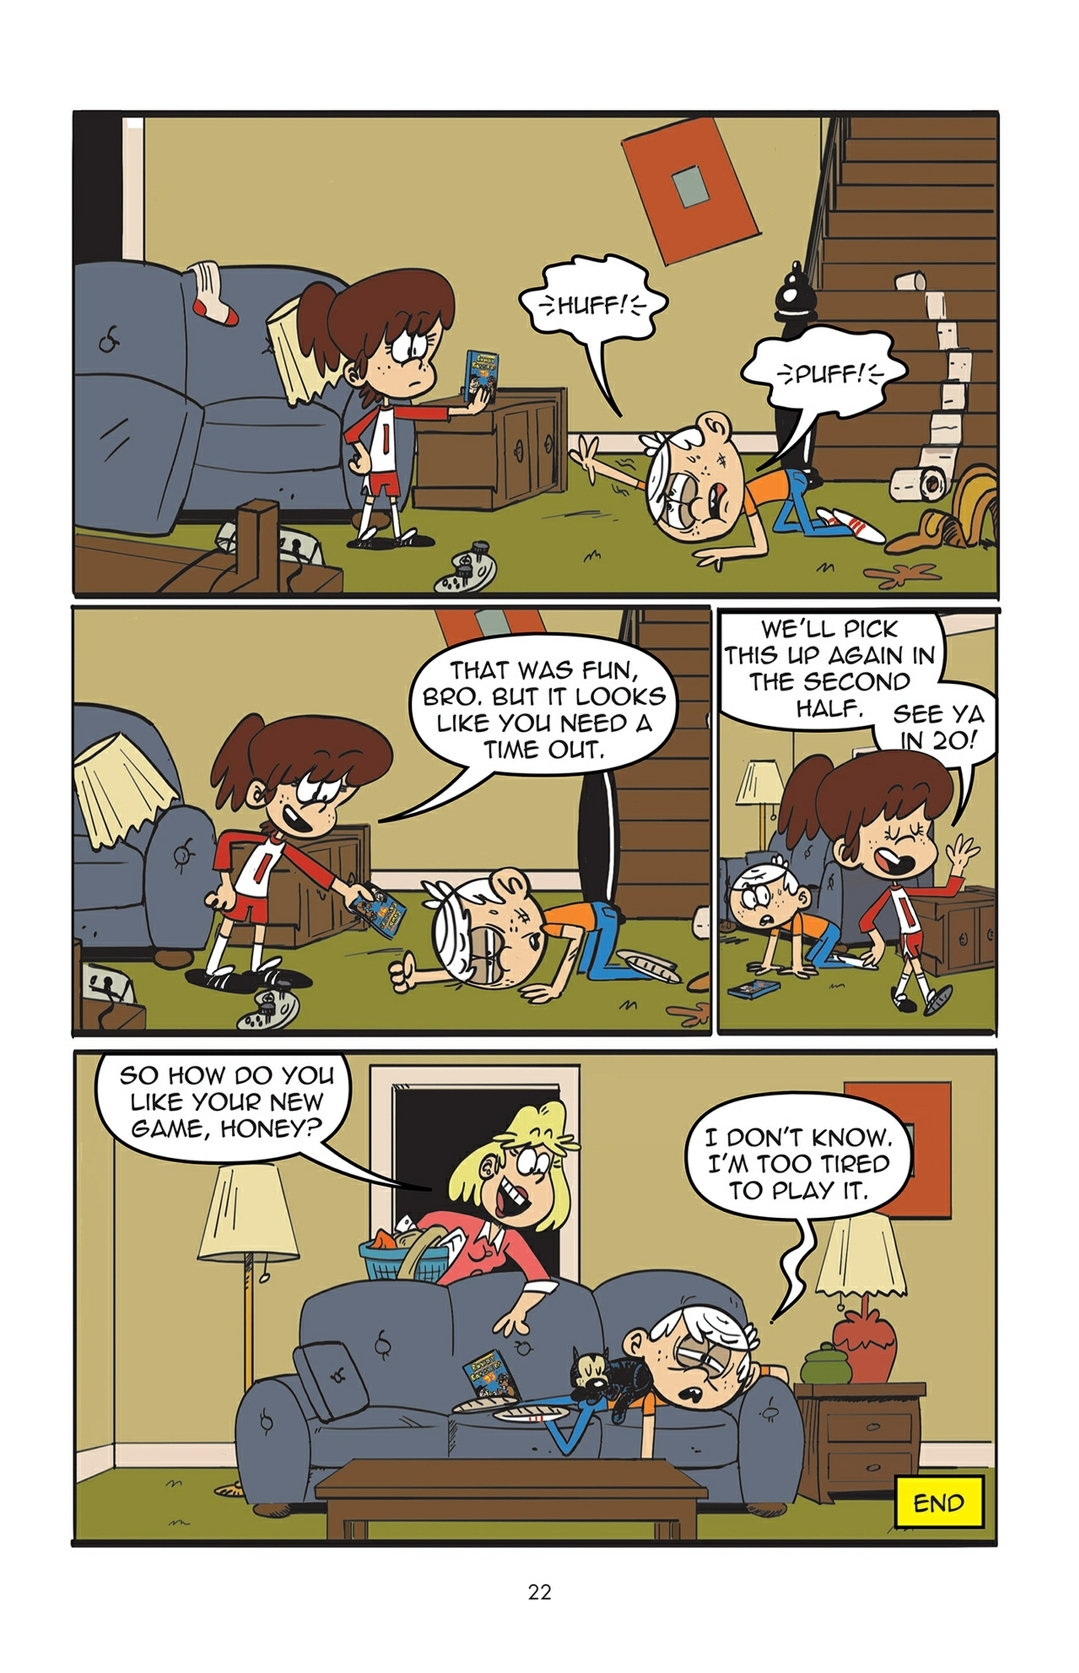 The Loud House Issue 7 Read The Loud House Issue 7 Comic Online In High Quality Read Full 